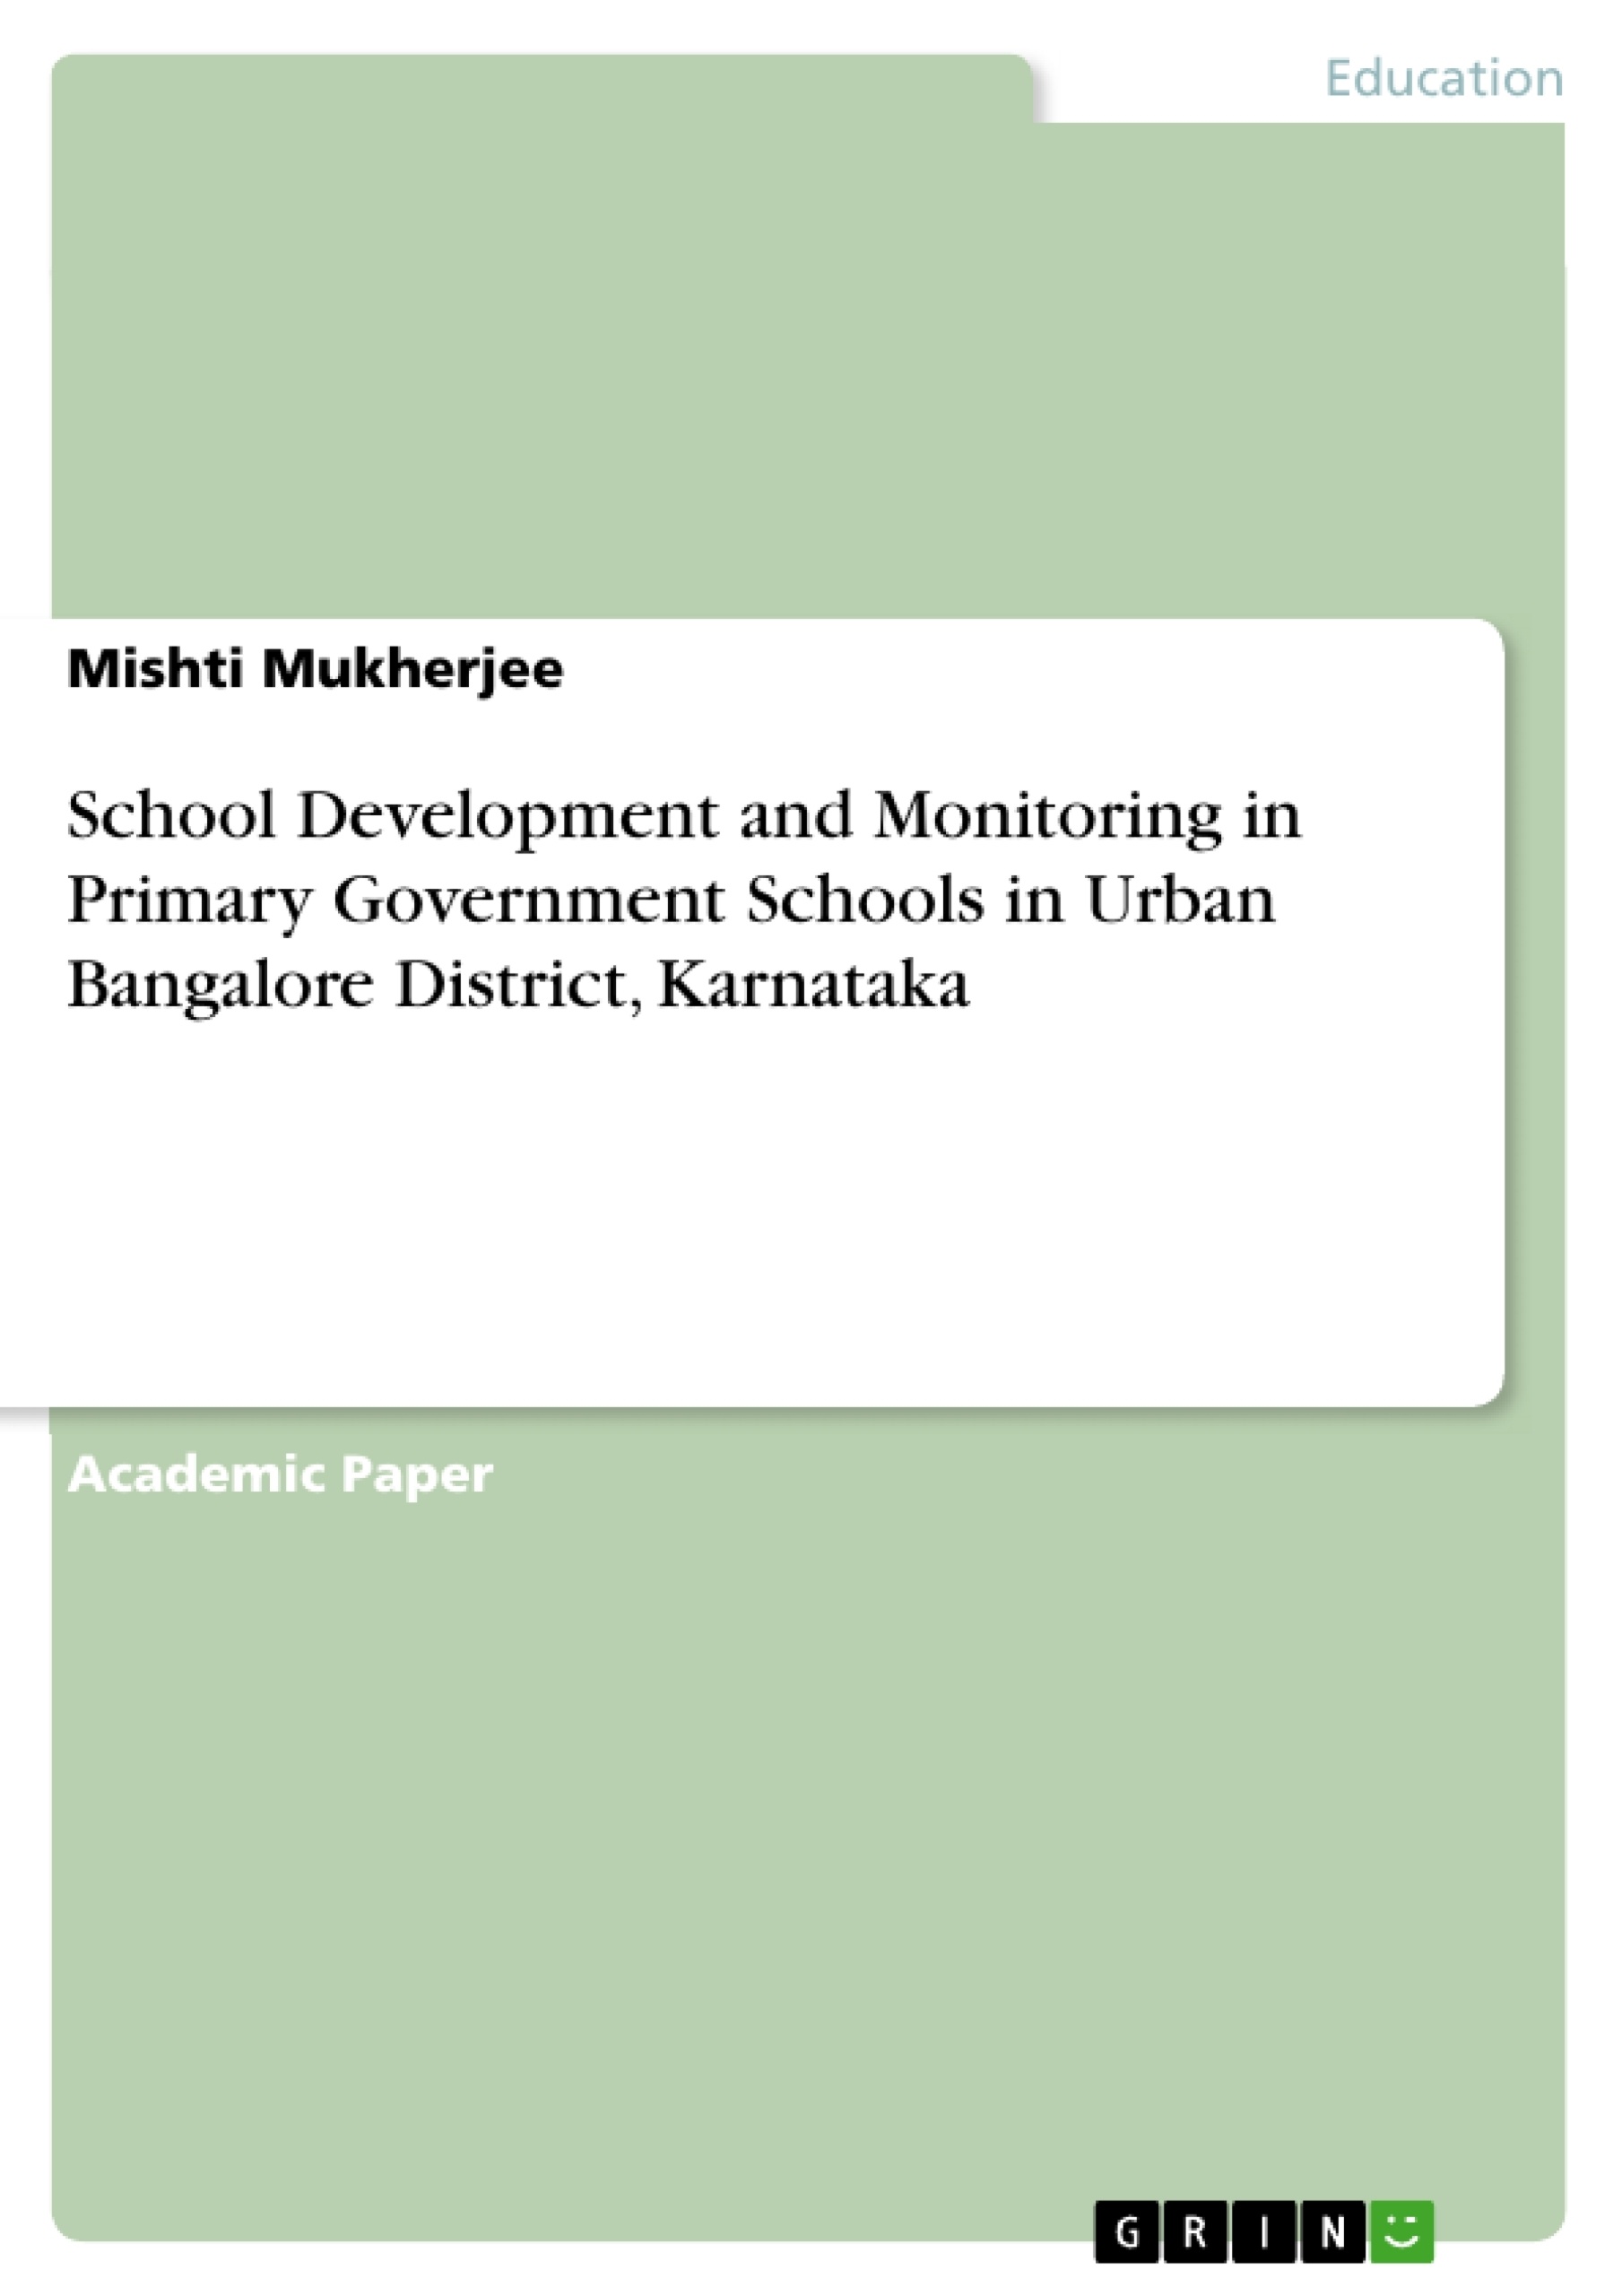 Título: School Development and Monitoring in Primary Government Schools in Urban Bangalore District, Karnataka